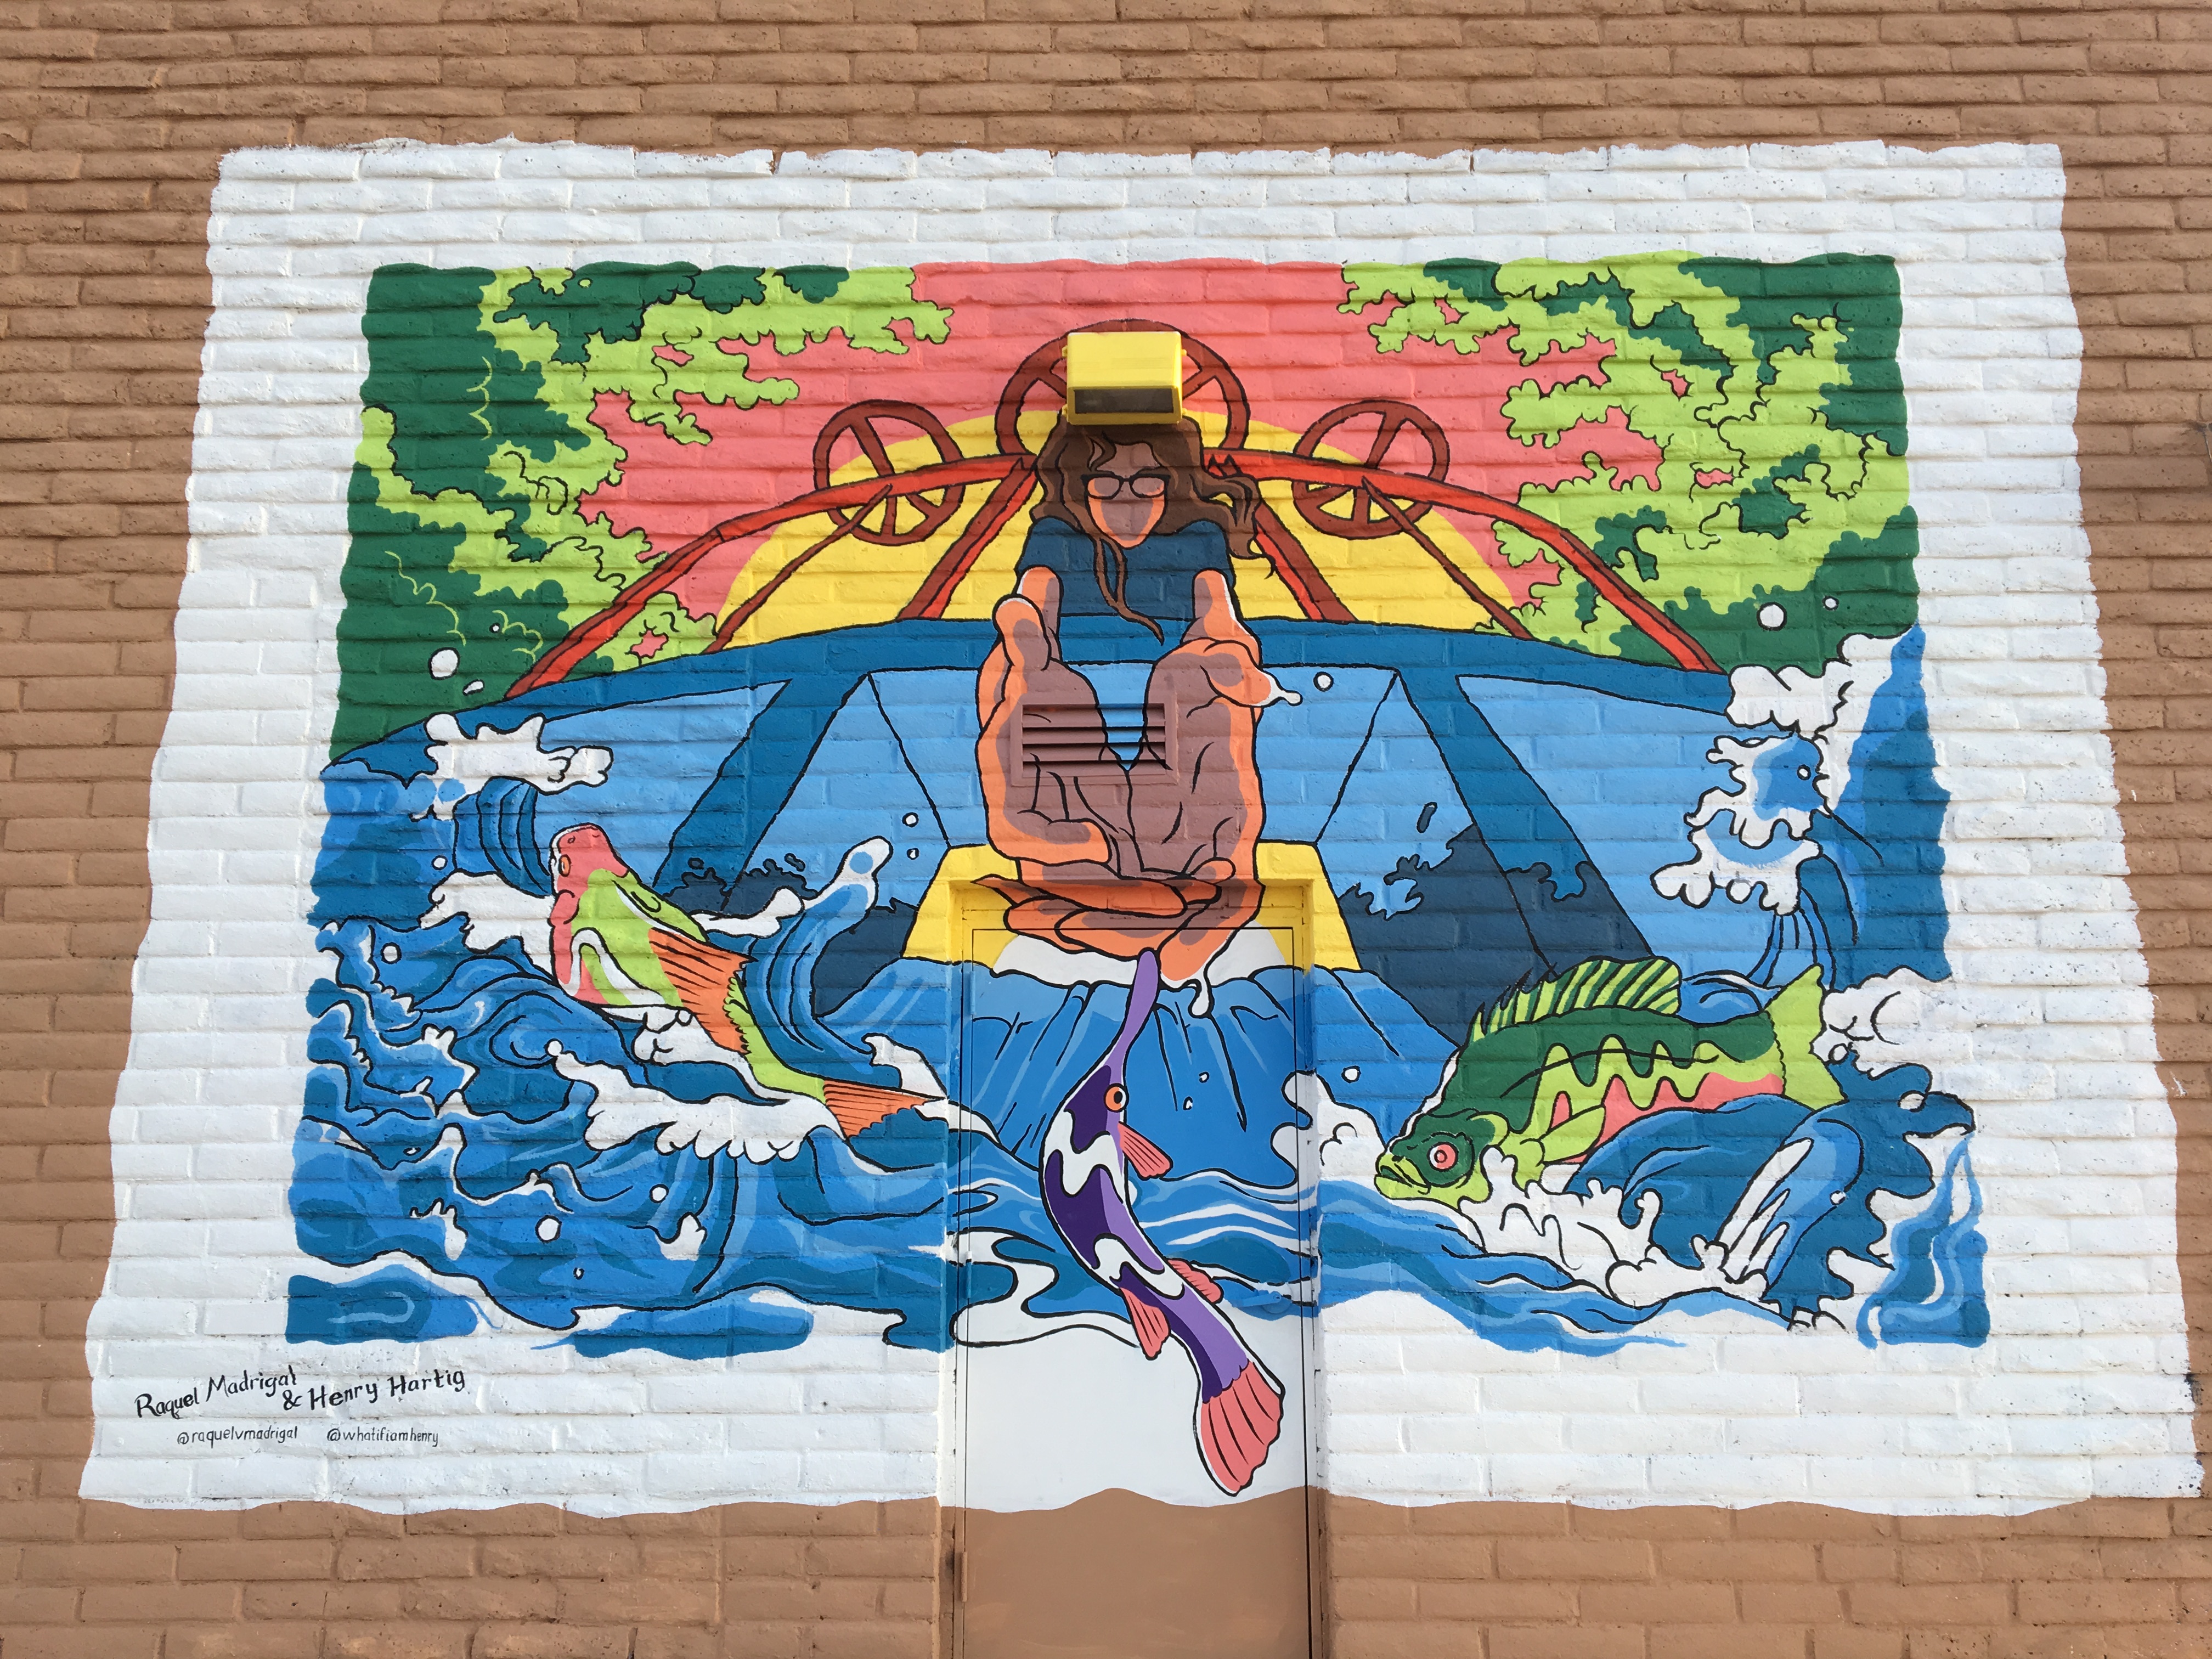 Mural of a person assisting endangered local fish over an acequia dam